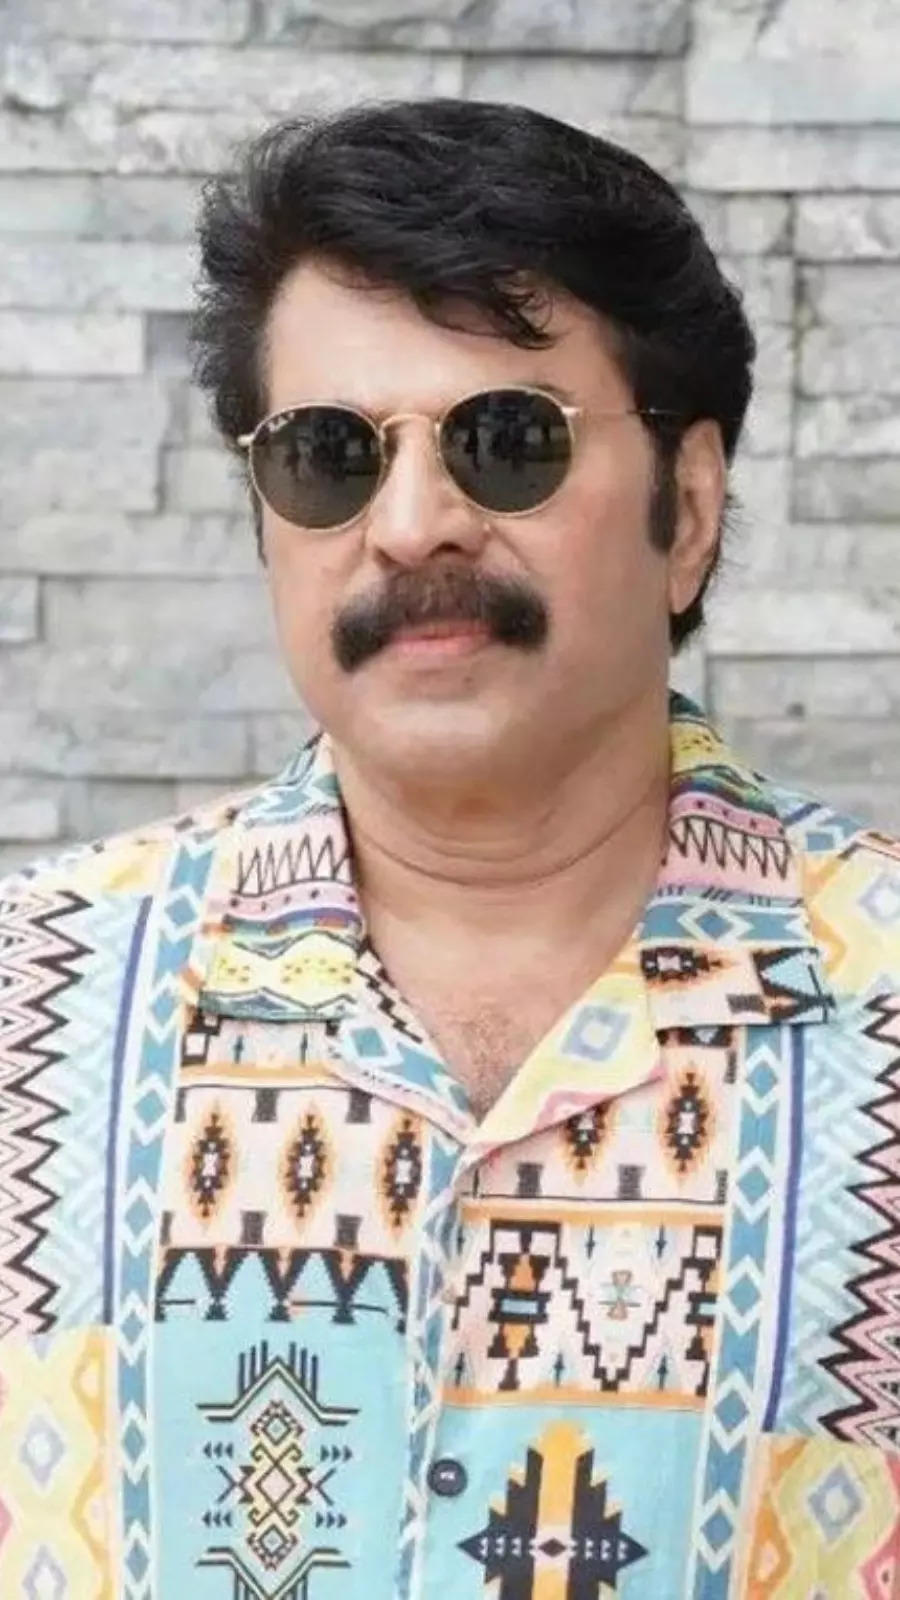 Times when Mammootty stunned in printed shirts